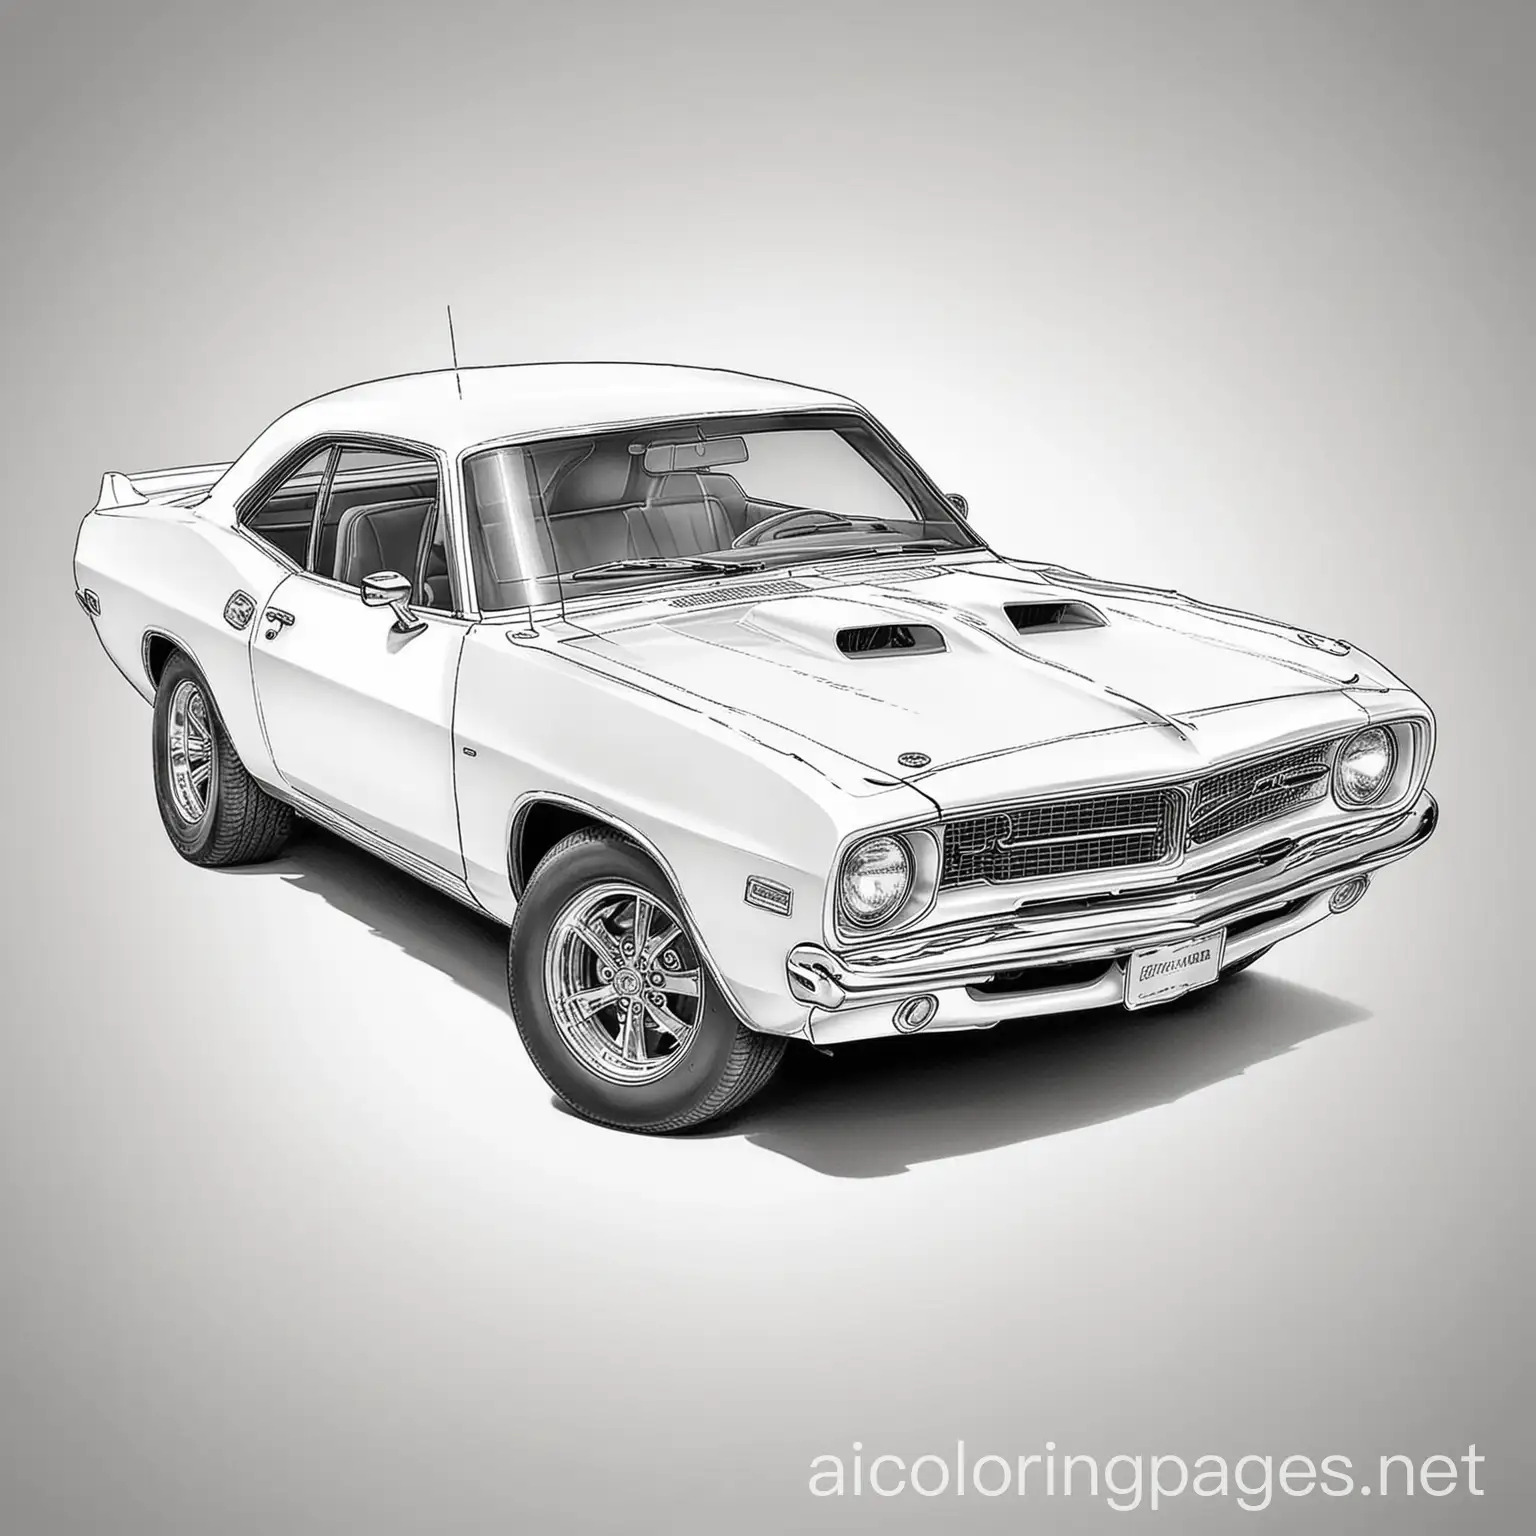 Plymouth-Hemi-Barracuda-Coloring-Page-for-Kids